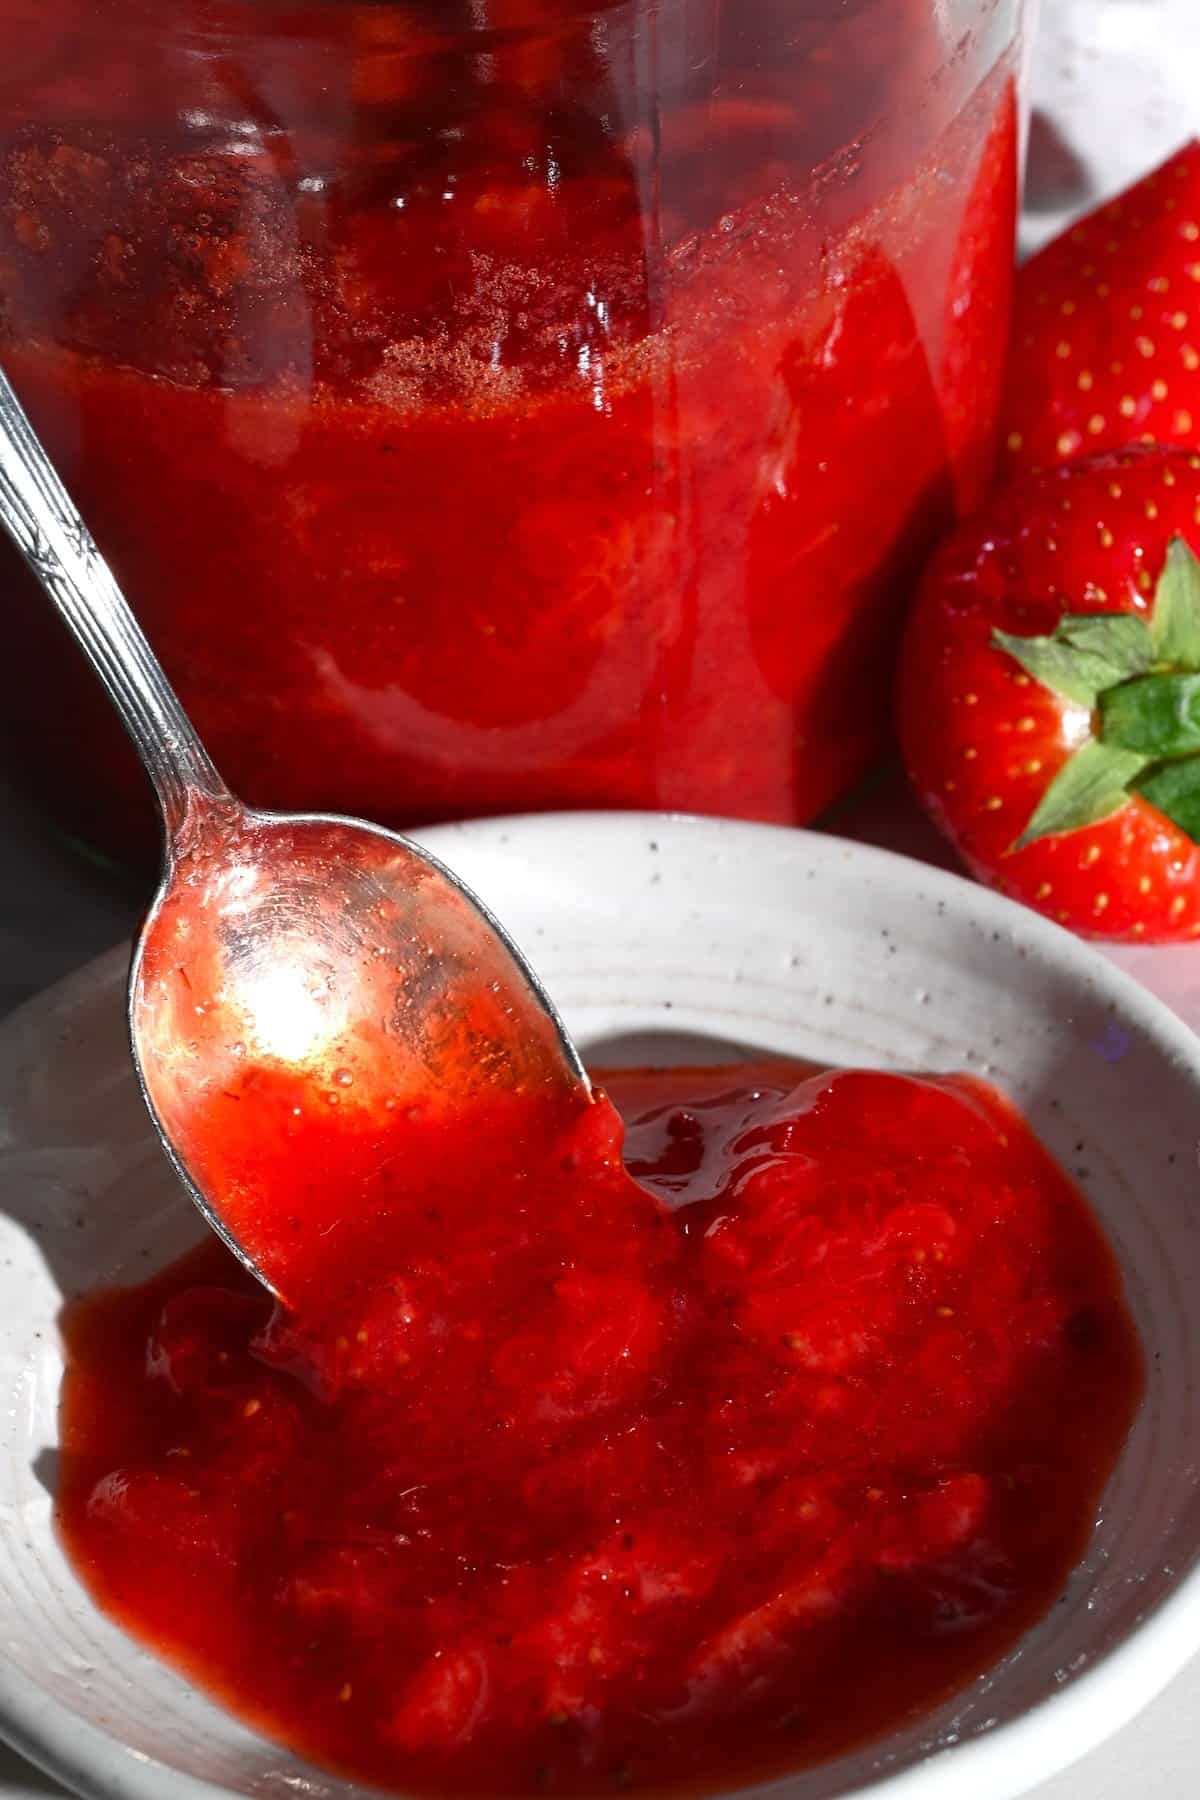 A spoonful of homemade strawberry compote